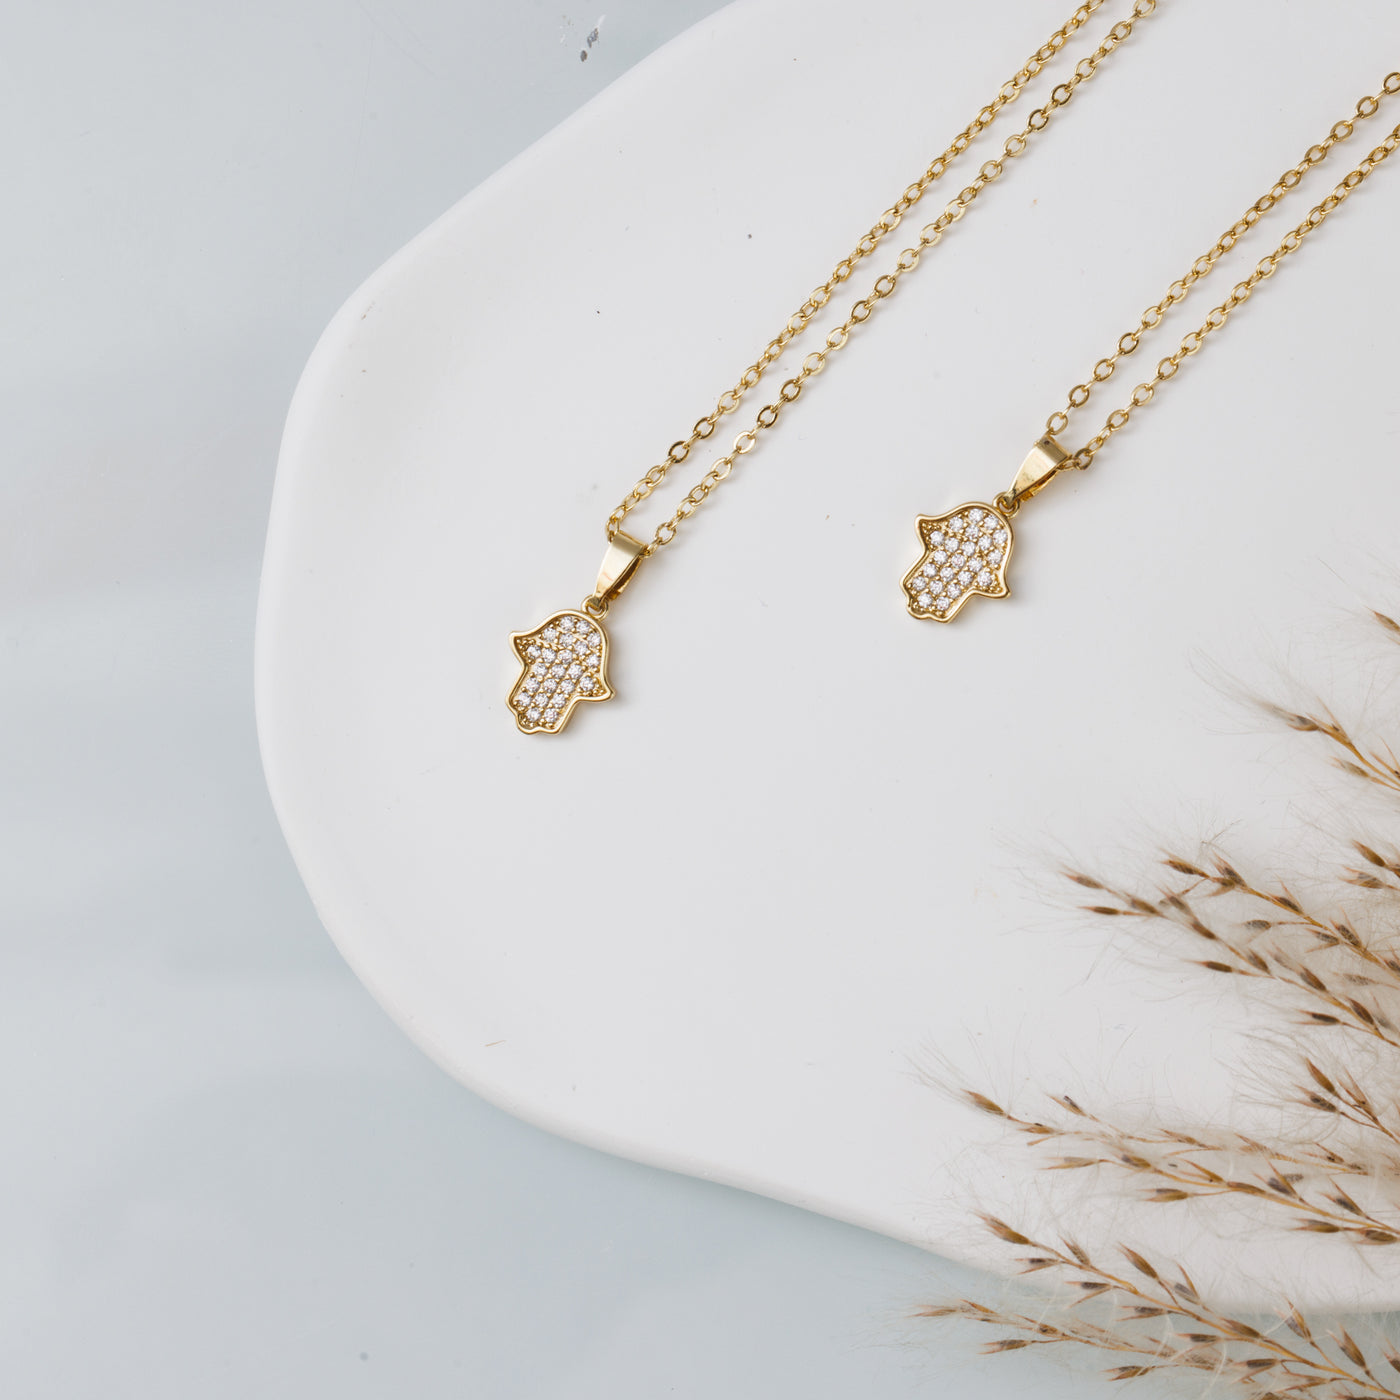 Hamsa Necklace with a Timeless Style - Naomi